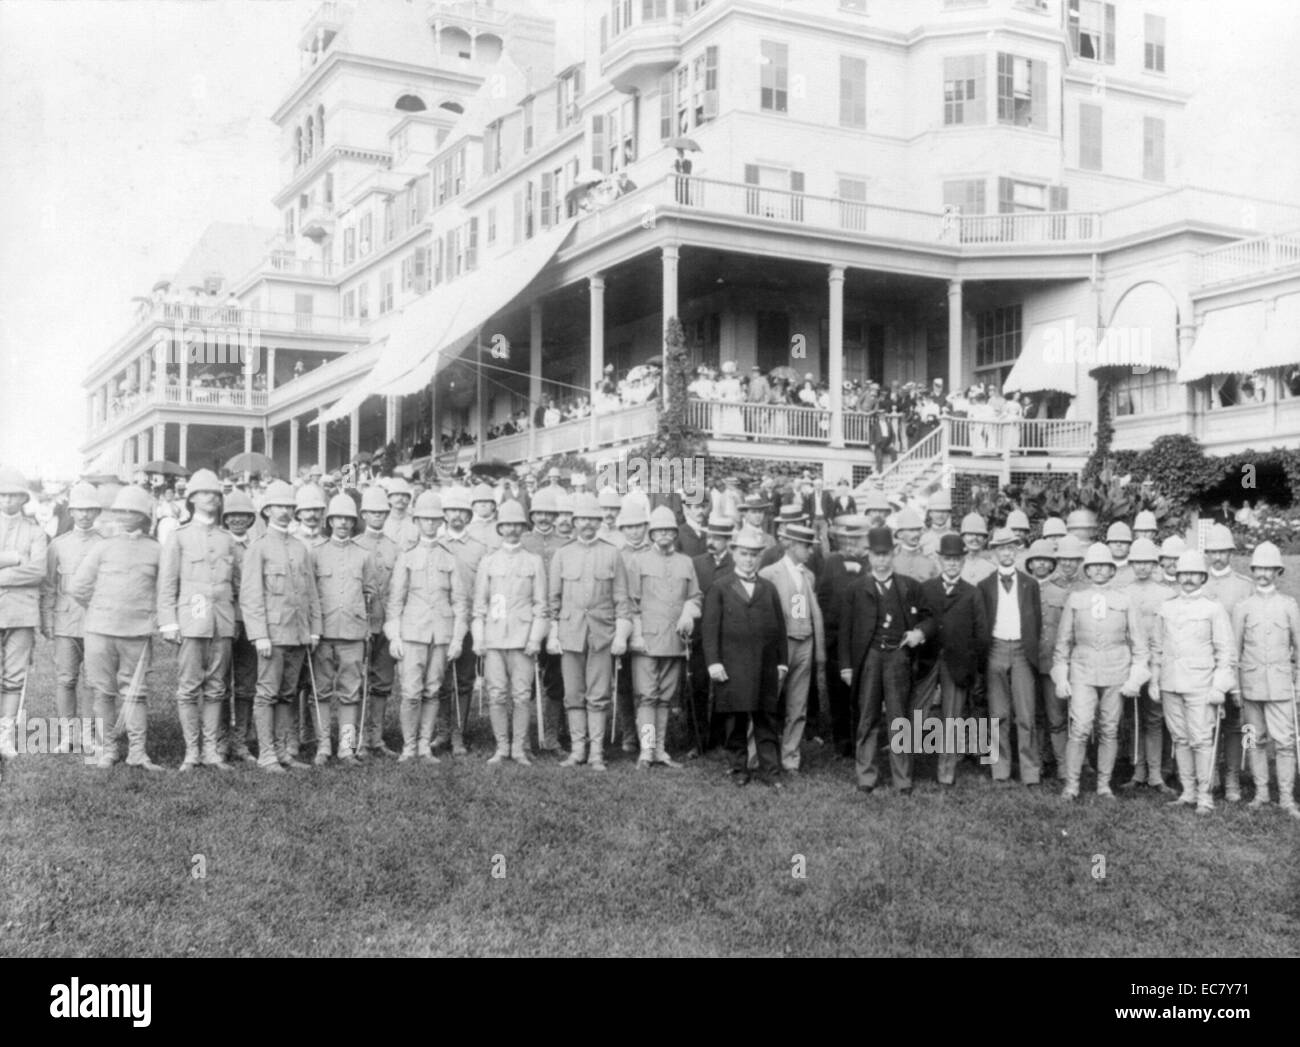 President McKinley and officers of 26th U.S.V. Infantry in front of Hotel Champlain, [Plattsburg, N.Y.]' McKinley (1843-1901)was the 25th President of the United States and led the nation to victory in the Spanish–American War, raised protective tariffs to promote American industry, and maintained the nation on the gold standard in a rejection of inflationary proposals. Stock Photo